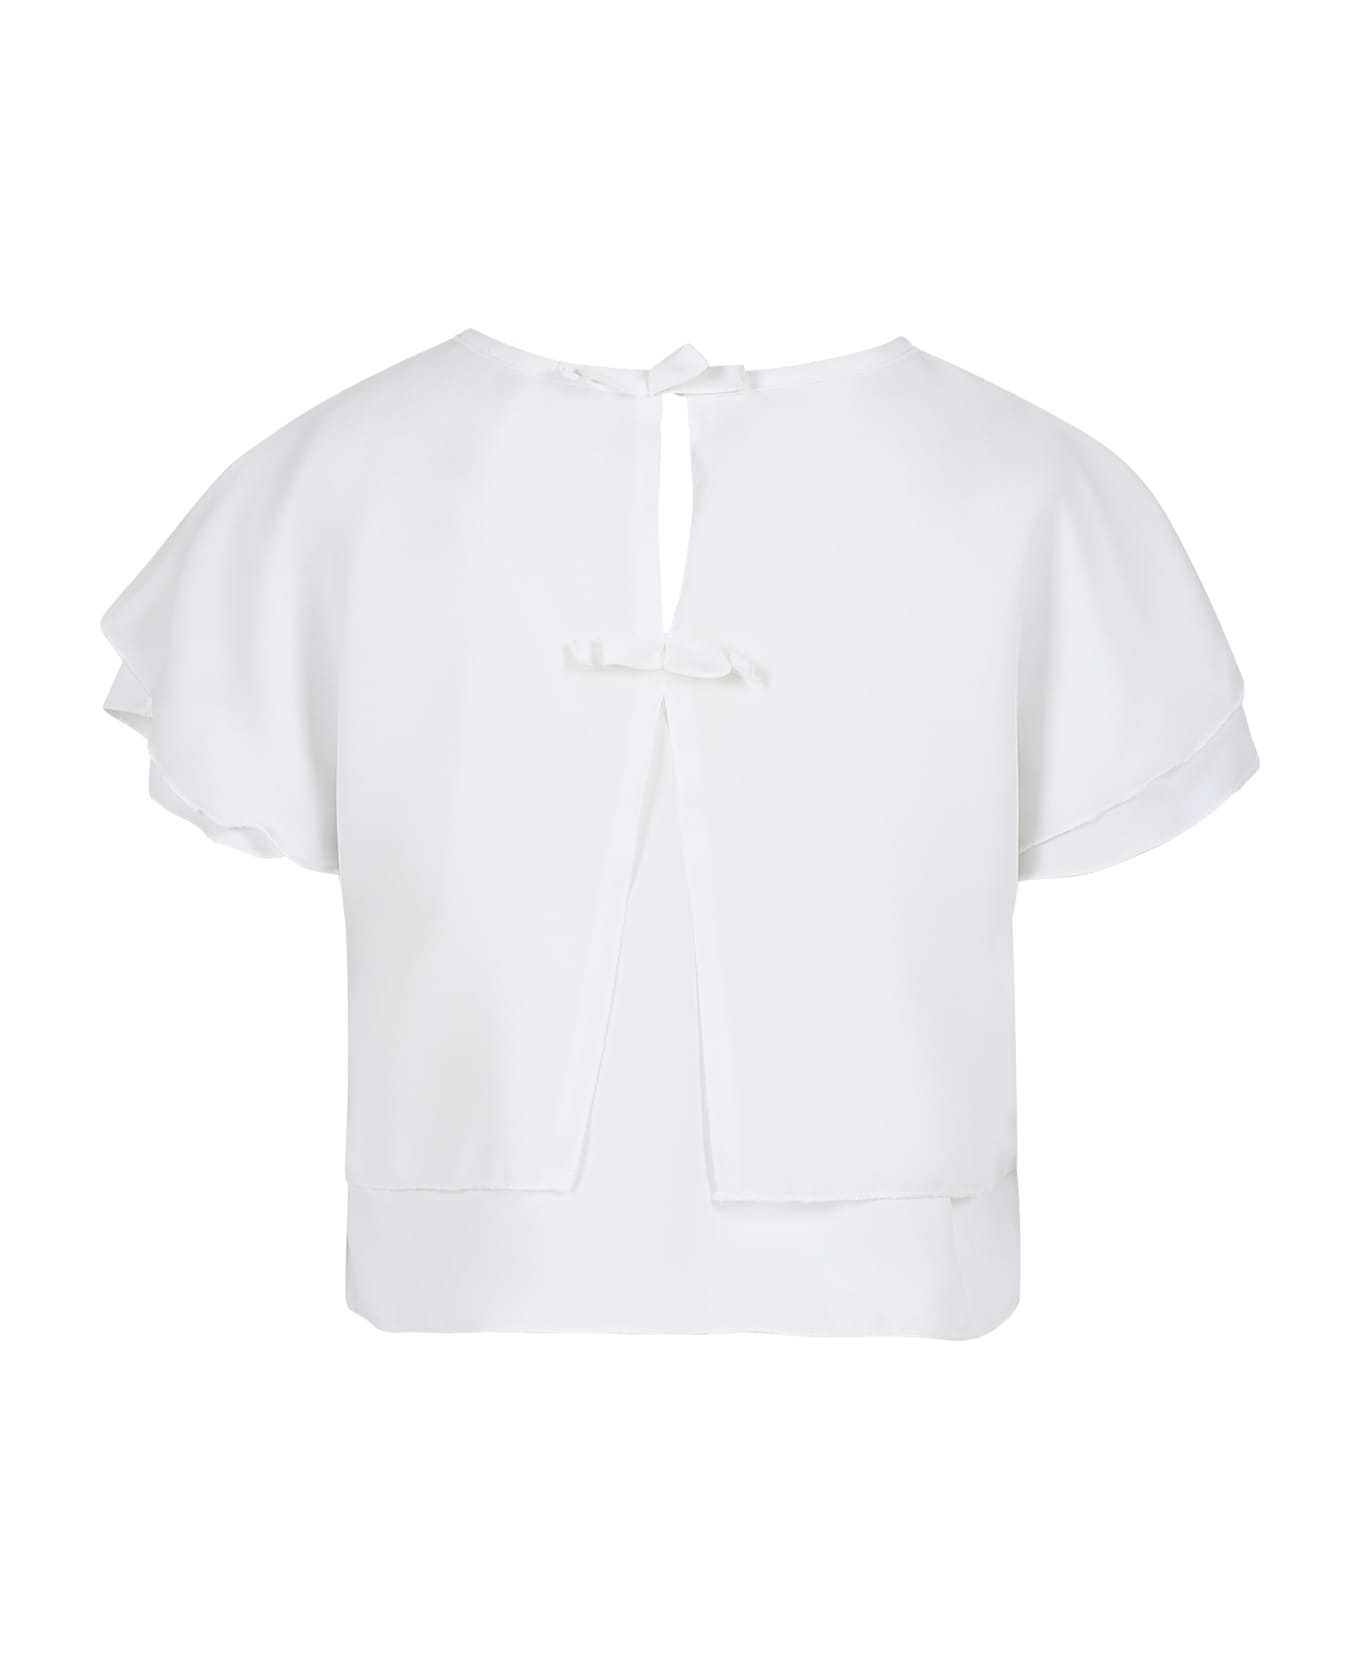 Monnalisa White Top For Girl With Bows - Panna トップス